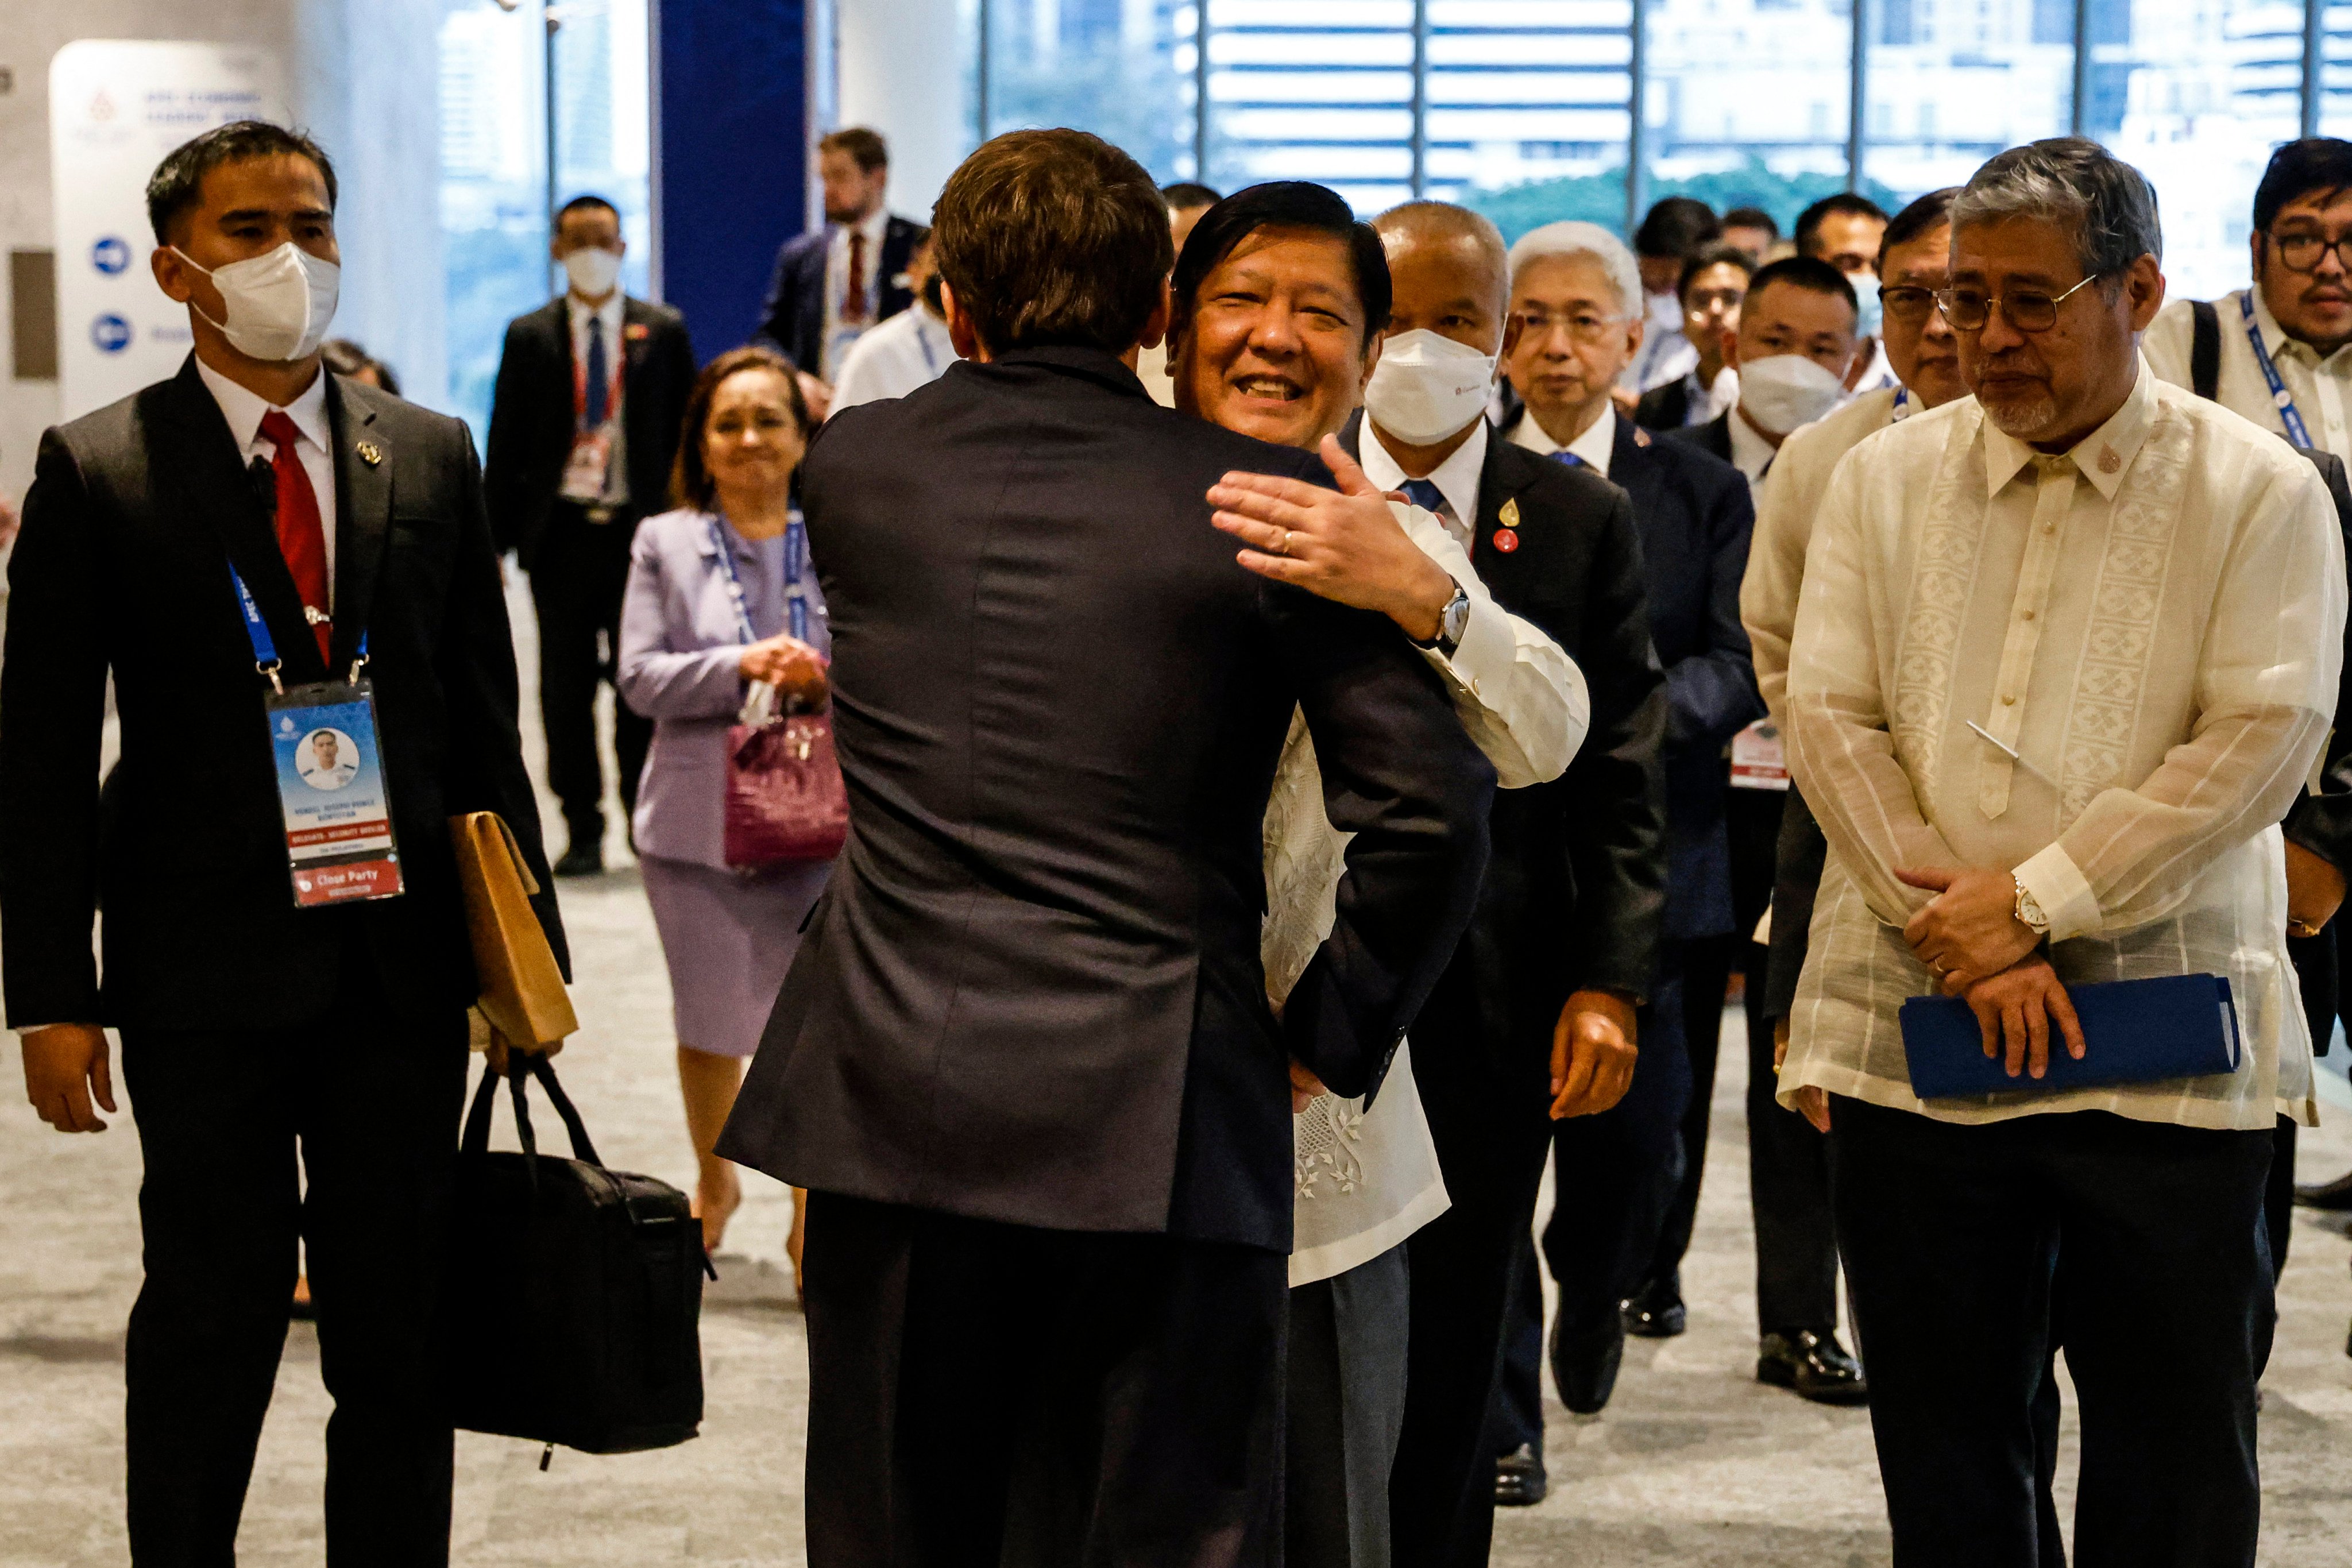 Philippine President Ferdinand Marcos Jnr hugs French President Emmanuel Macron on the sidelines of an Apec summit in 2022. Photo: AFP